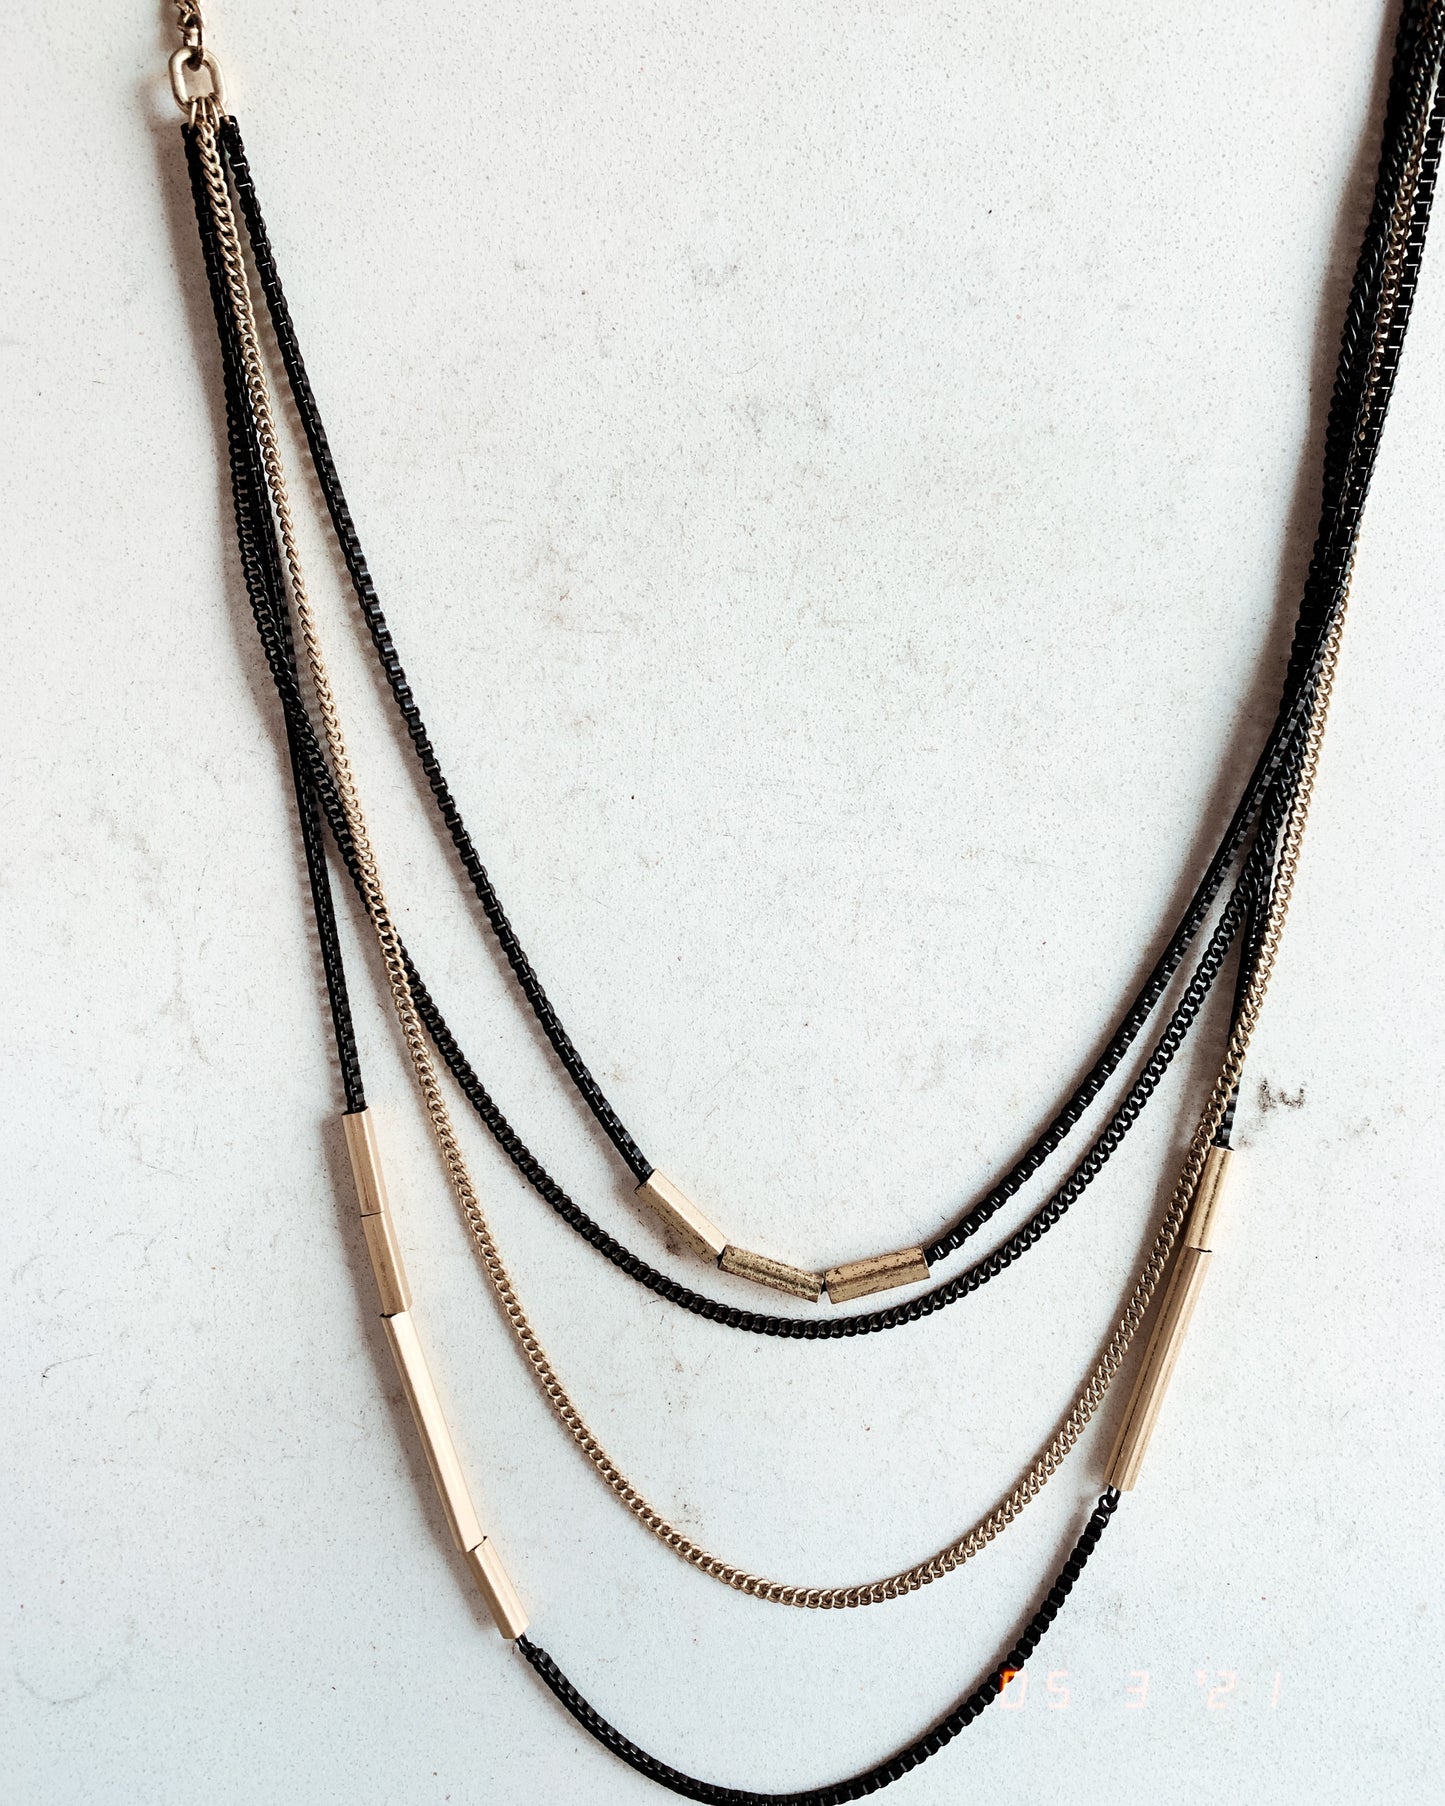 Multi layered black + gold chain necklace